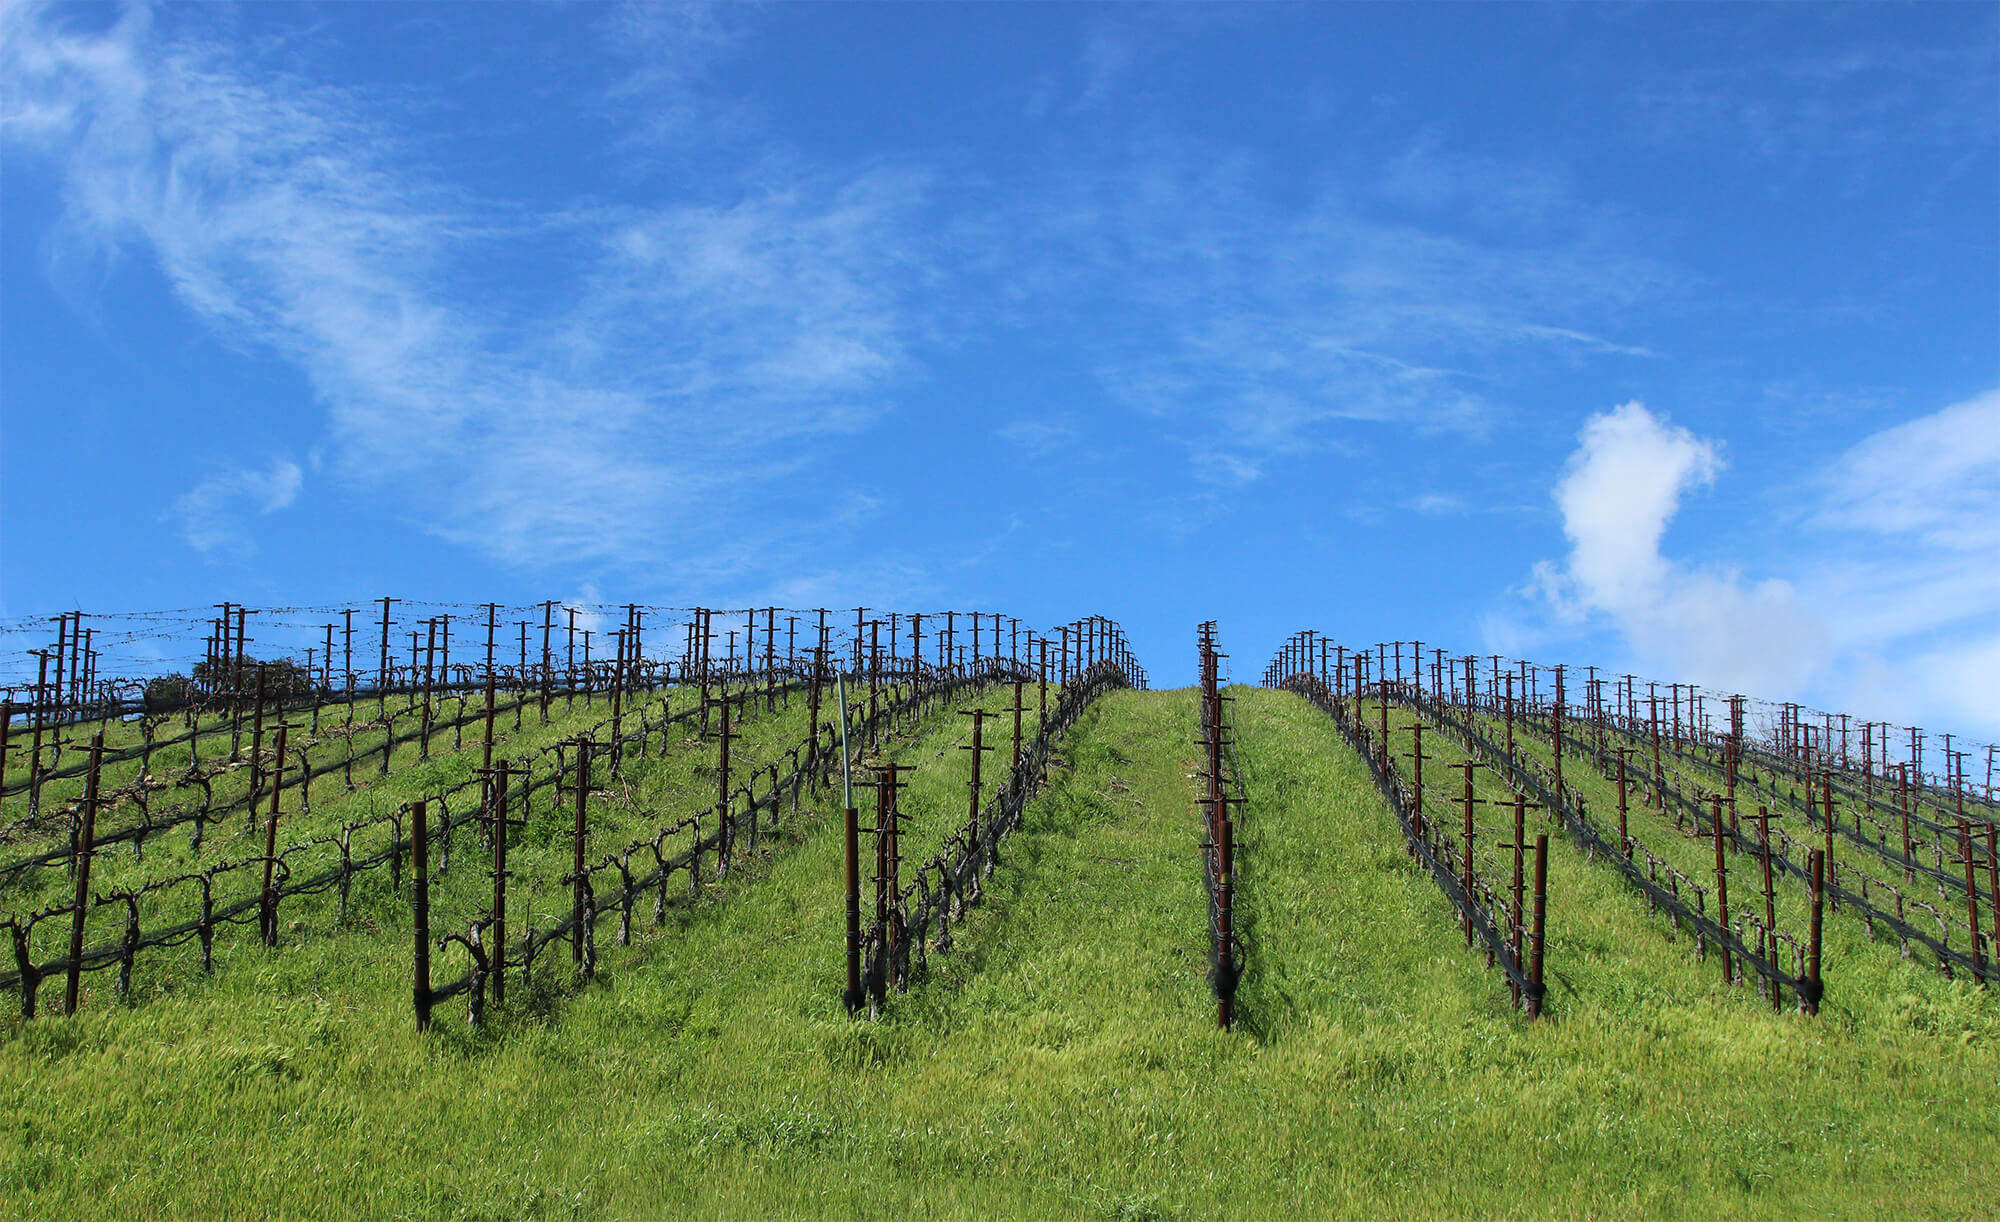 Rows of vines with bright green grass, bright blue skies and wispy clouds